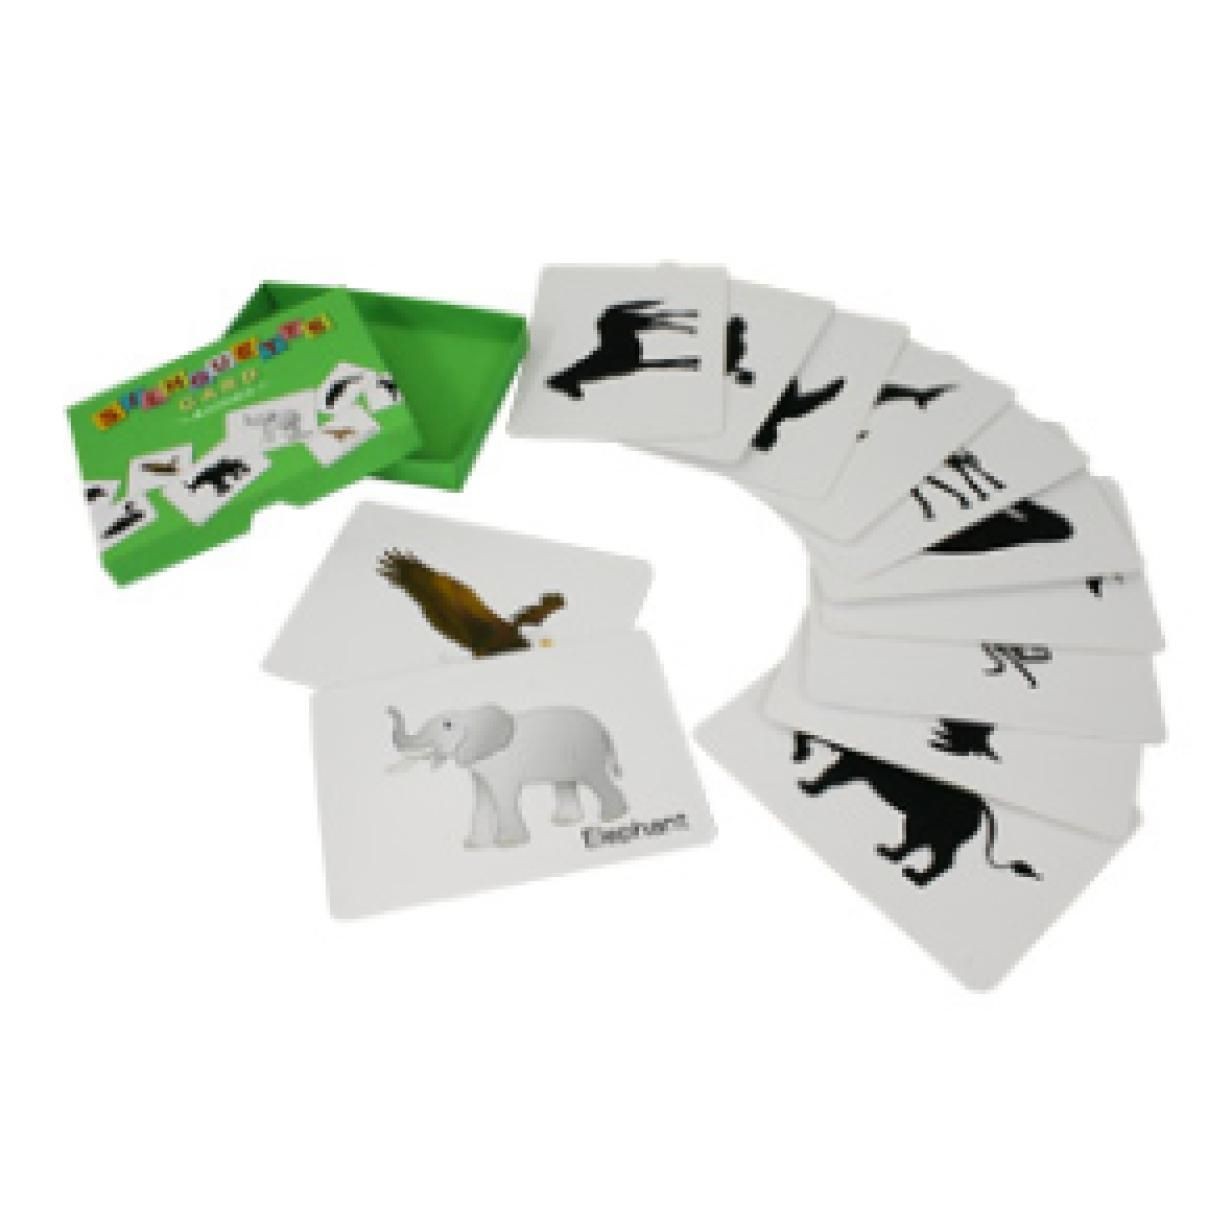 Canon Papercraft Silhouette Card Animals toys Paper Craft Educational Game